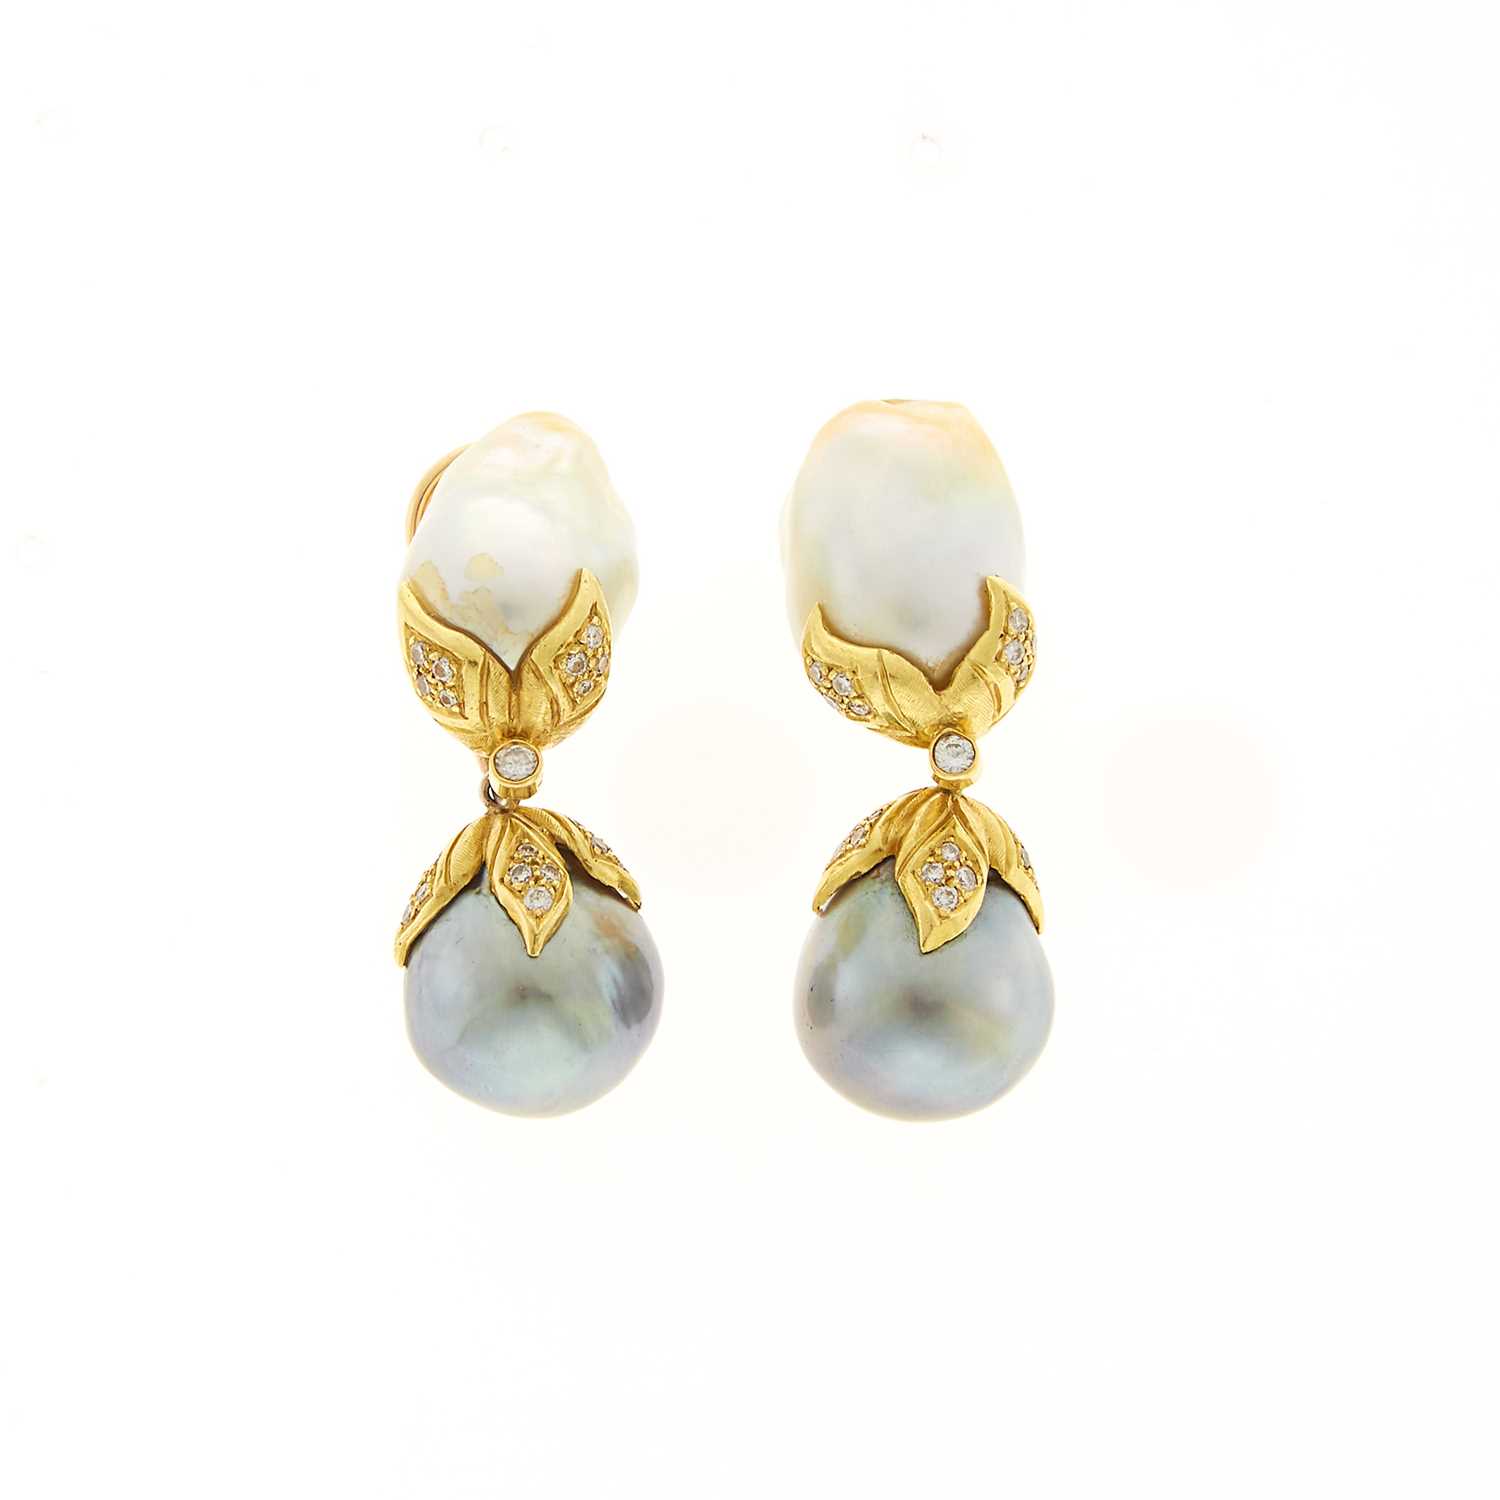 Lot 2043 - Gumps Pair of Gold, Baroque Cultured Pearl and Gray Pearl and Diamond Pendant-Earrings